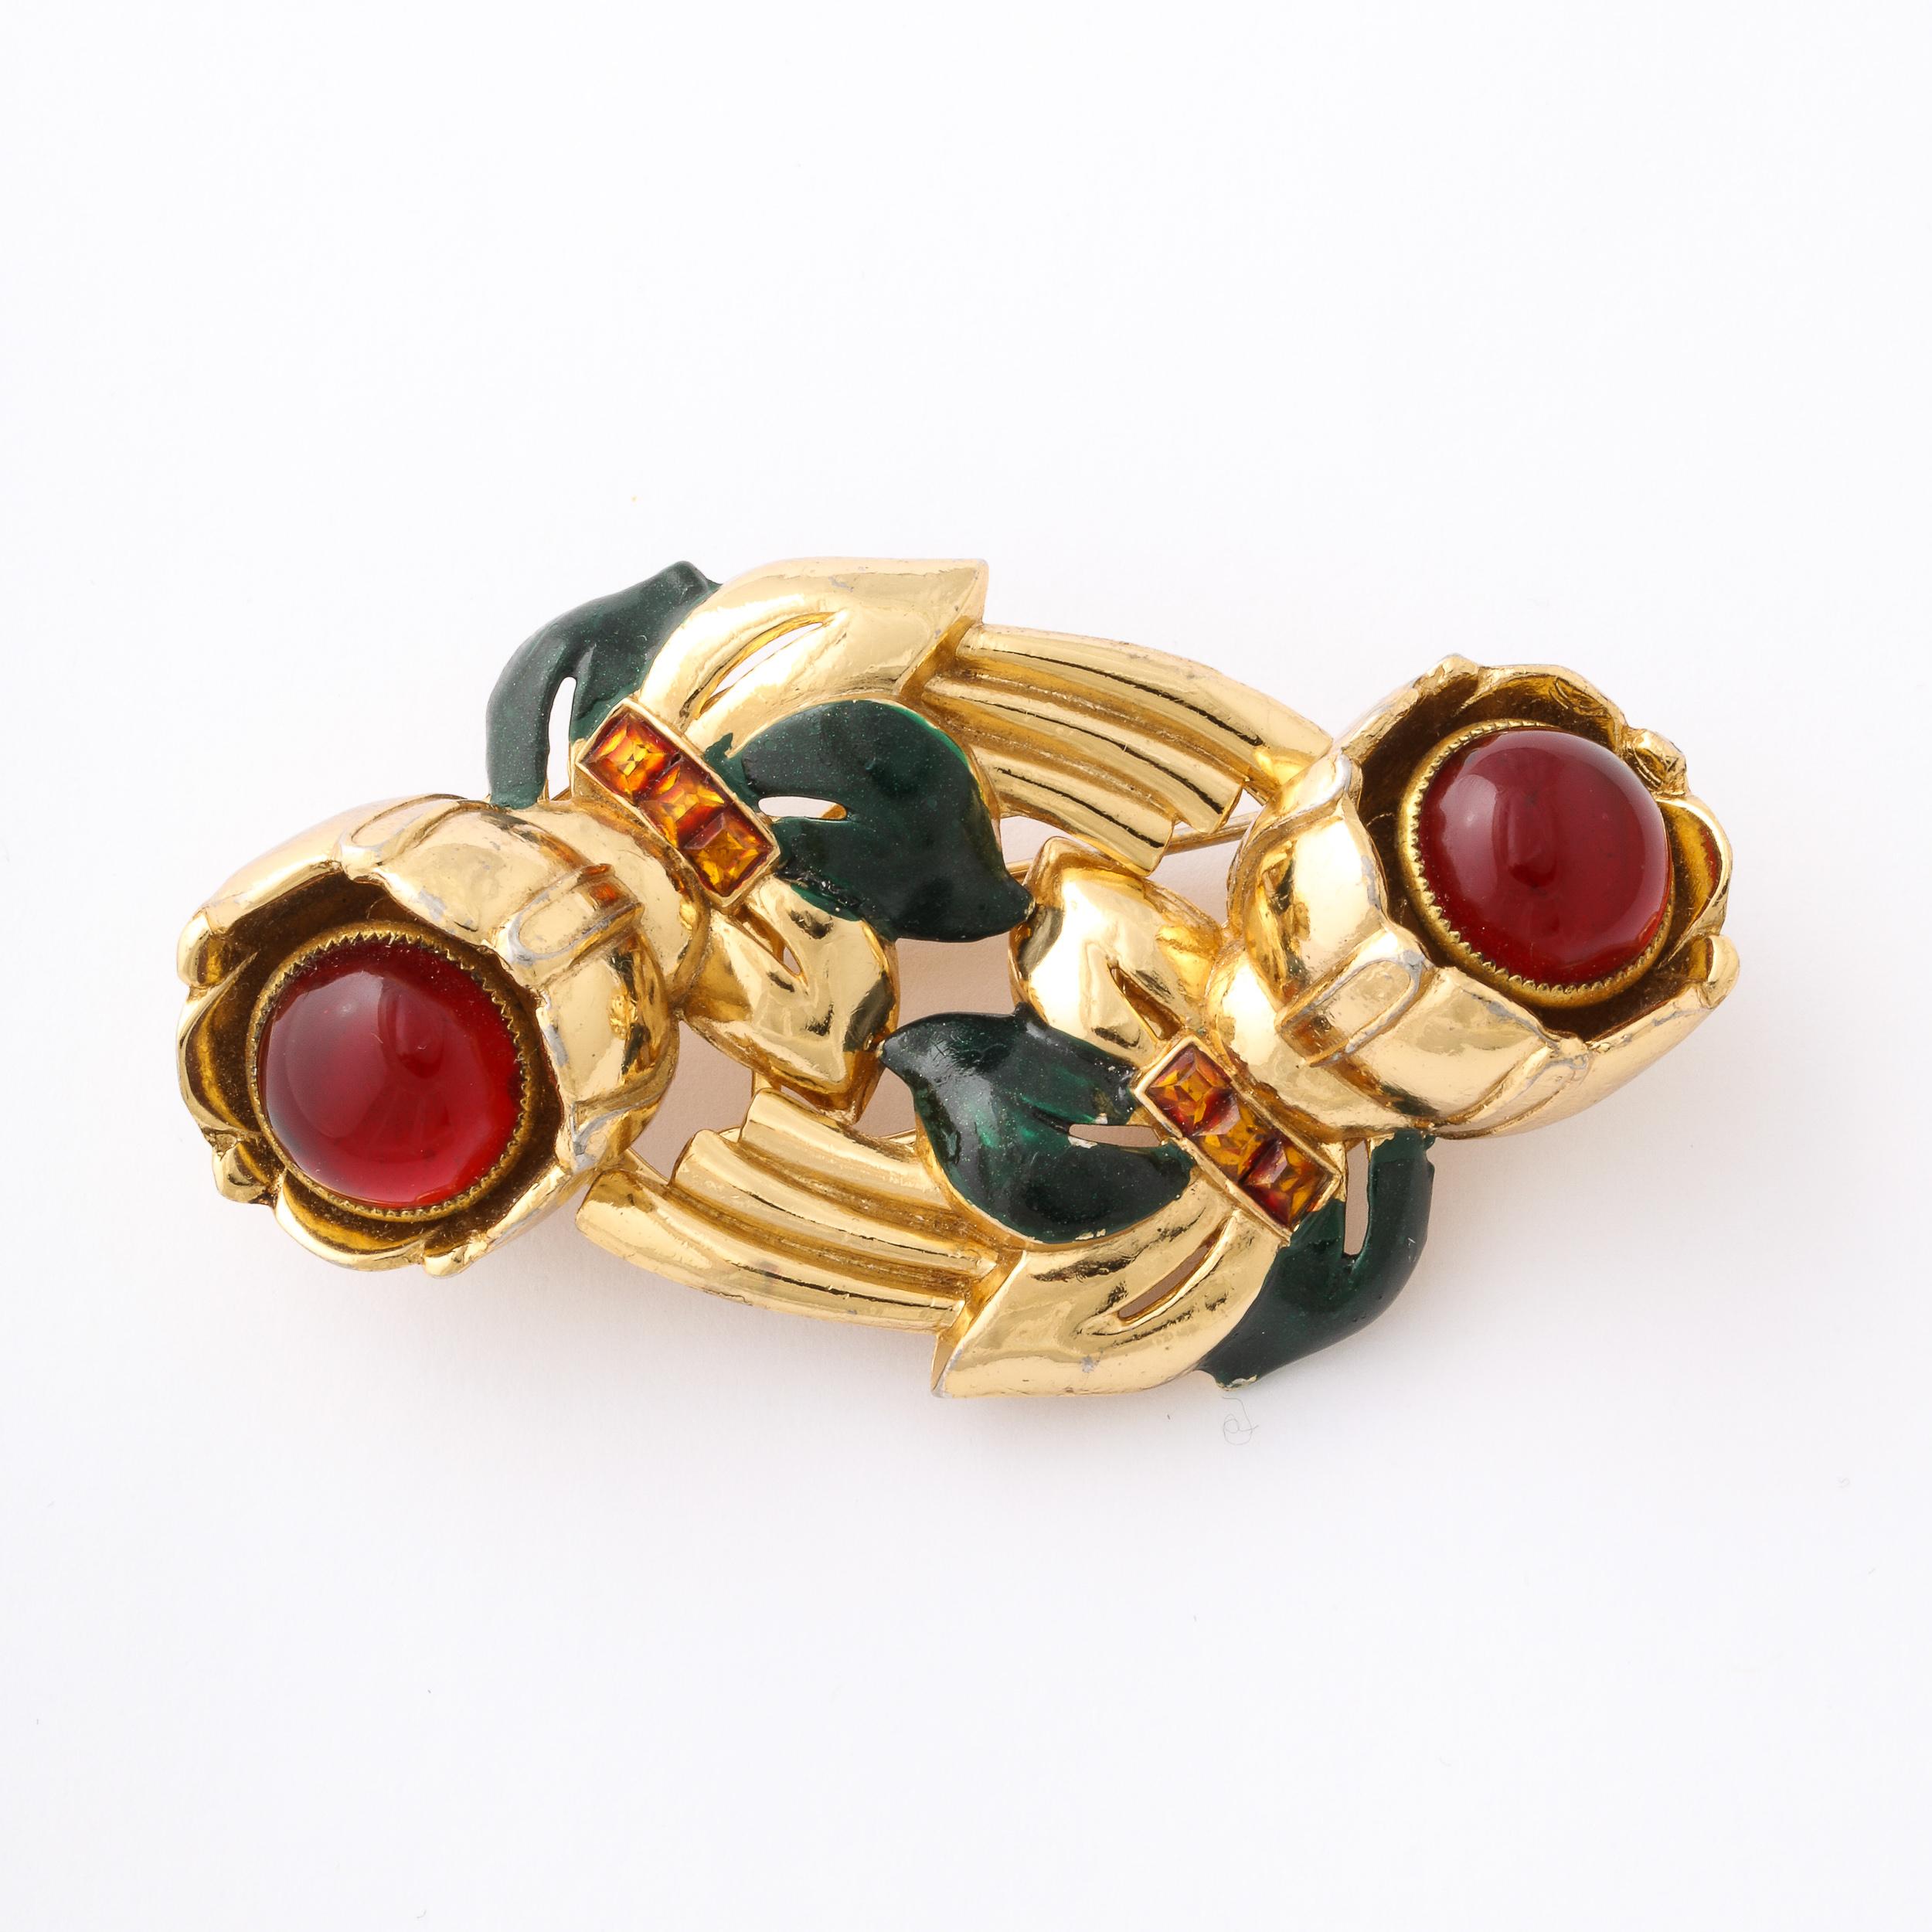 This Duette Camellia Brooch by Coro, set designed by Gene Verri was patented in the United States in 1938. From one of the foremost makers of American costume Jewelry in the Early 20th Century, the brooch serves as a gorgeous example of the